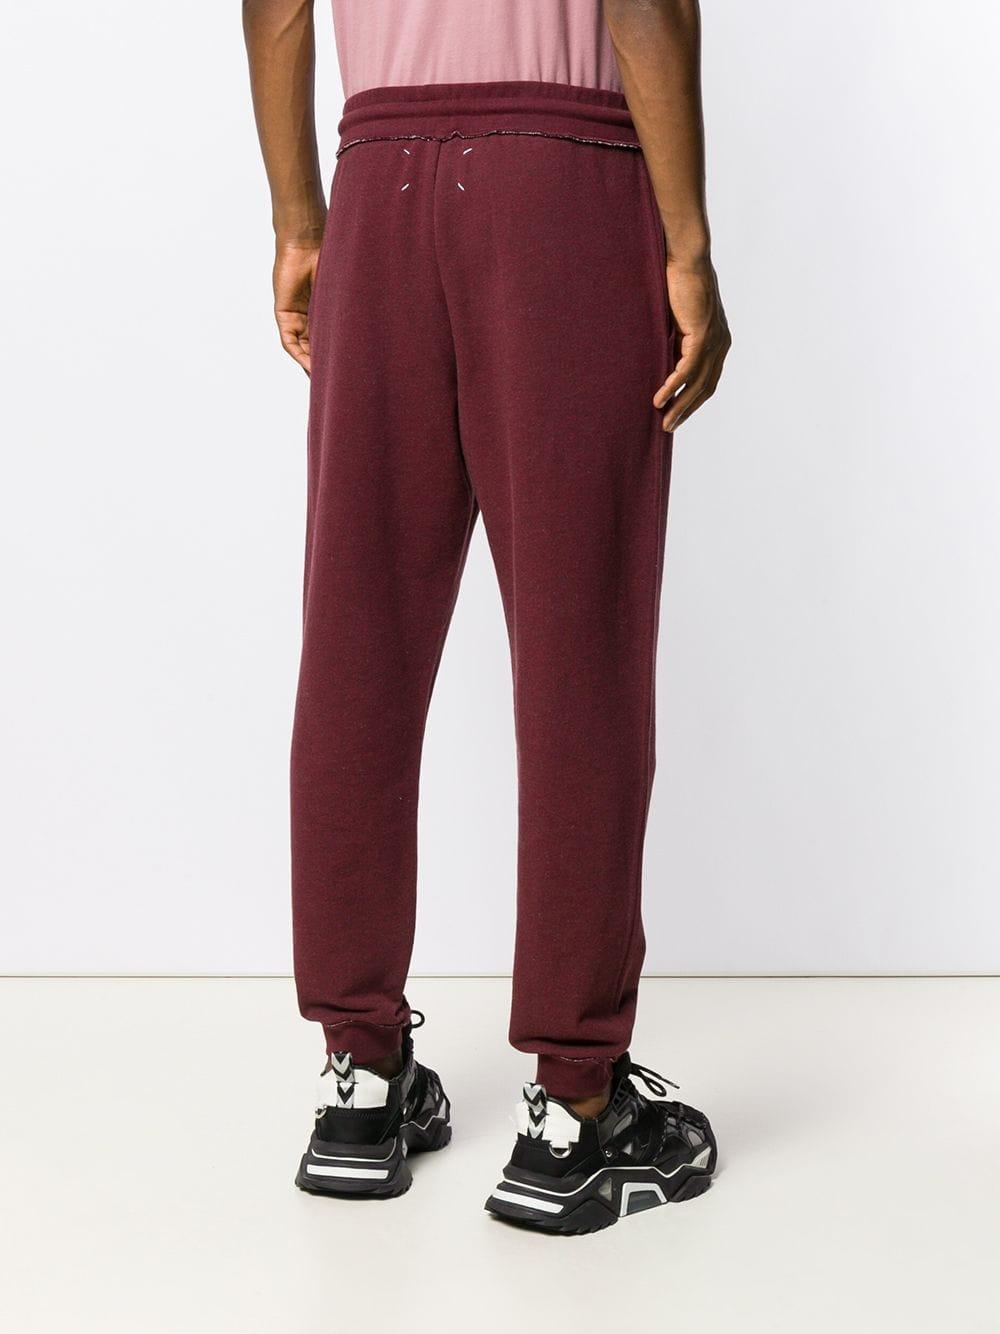 Maison Margiela Cotton Drawstring Track Pants in Red for Men - Lyst